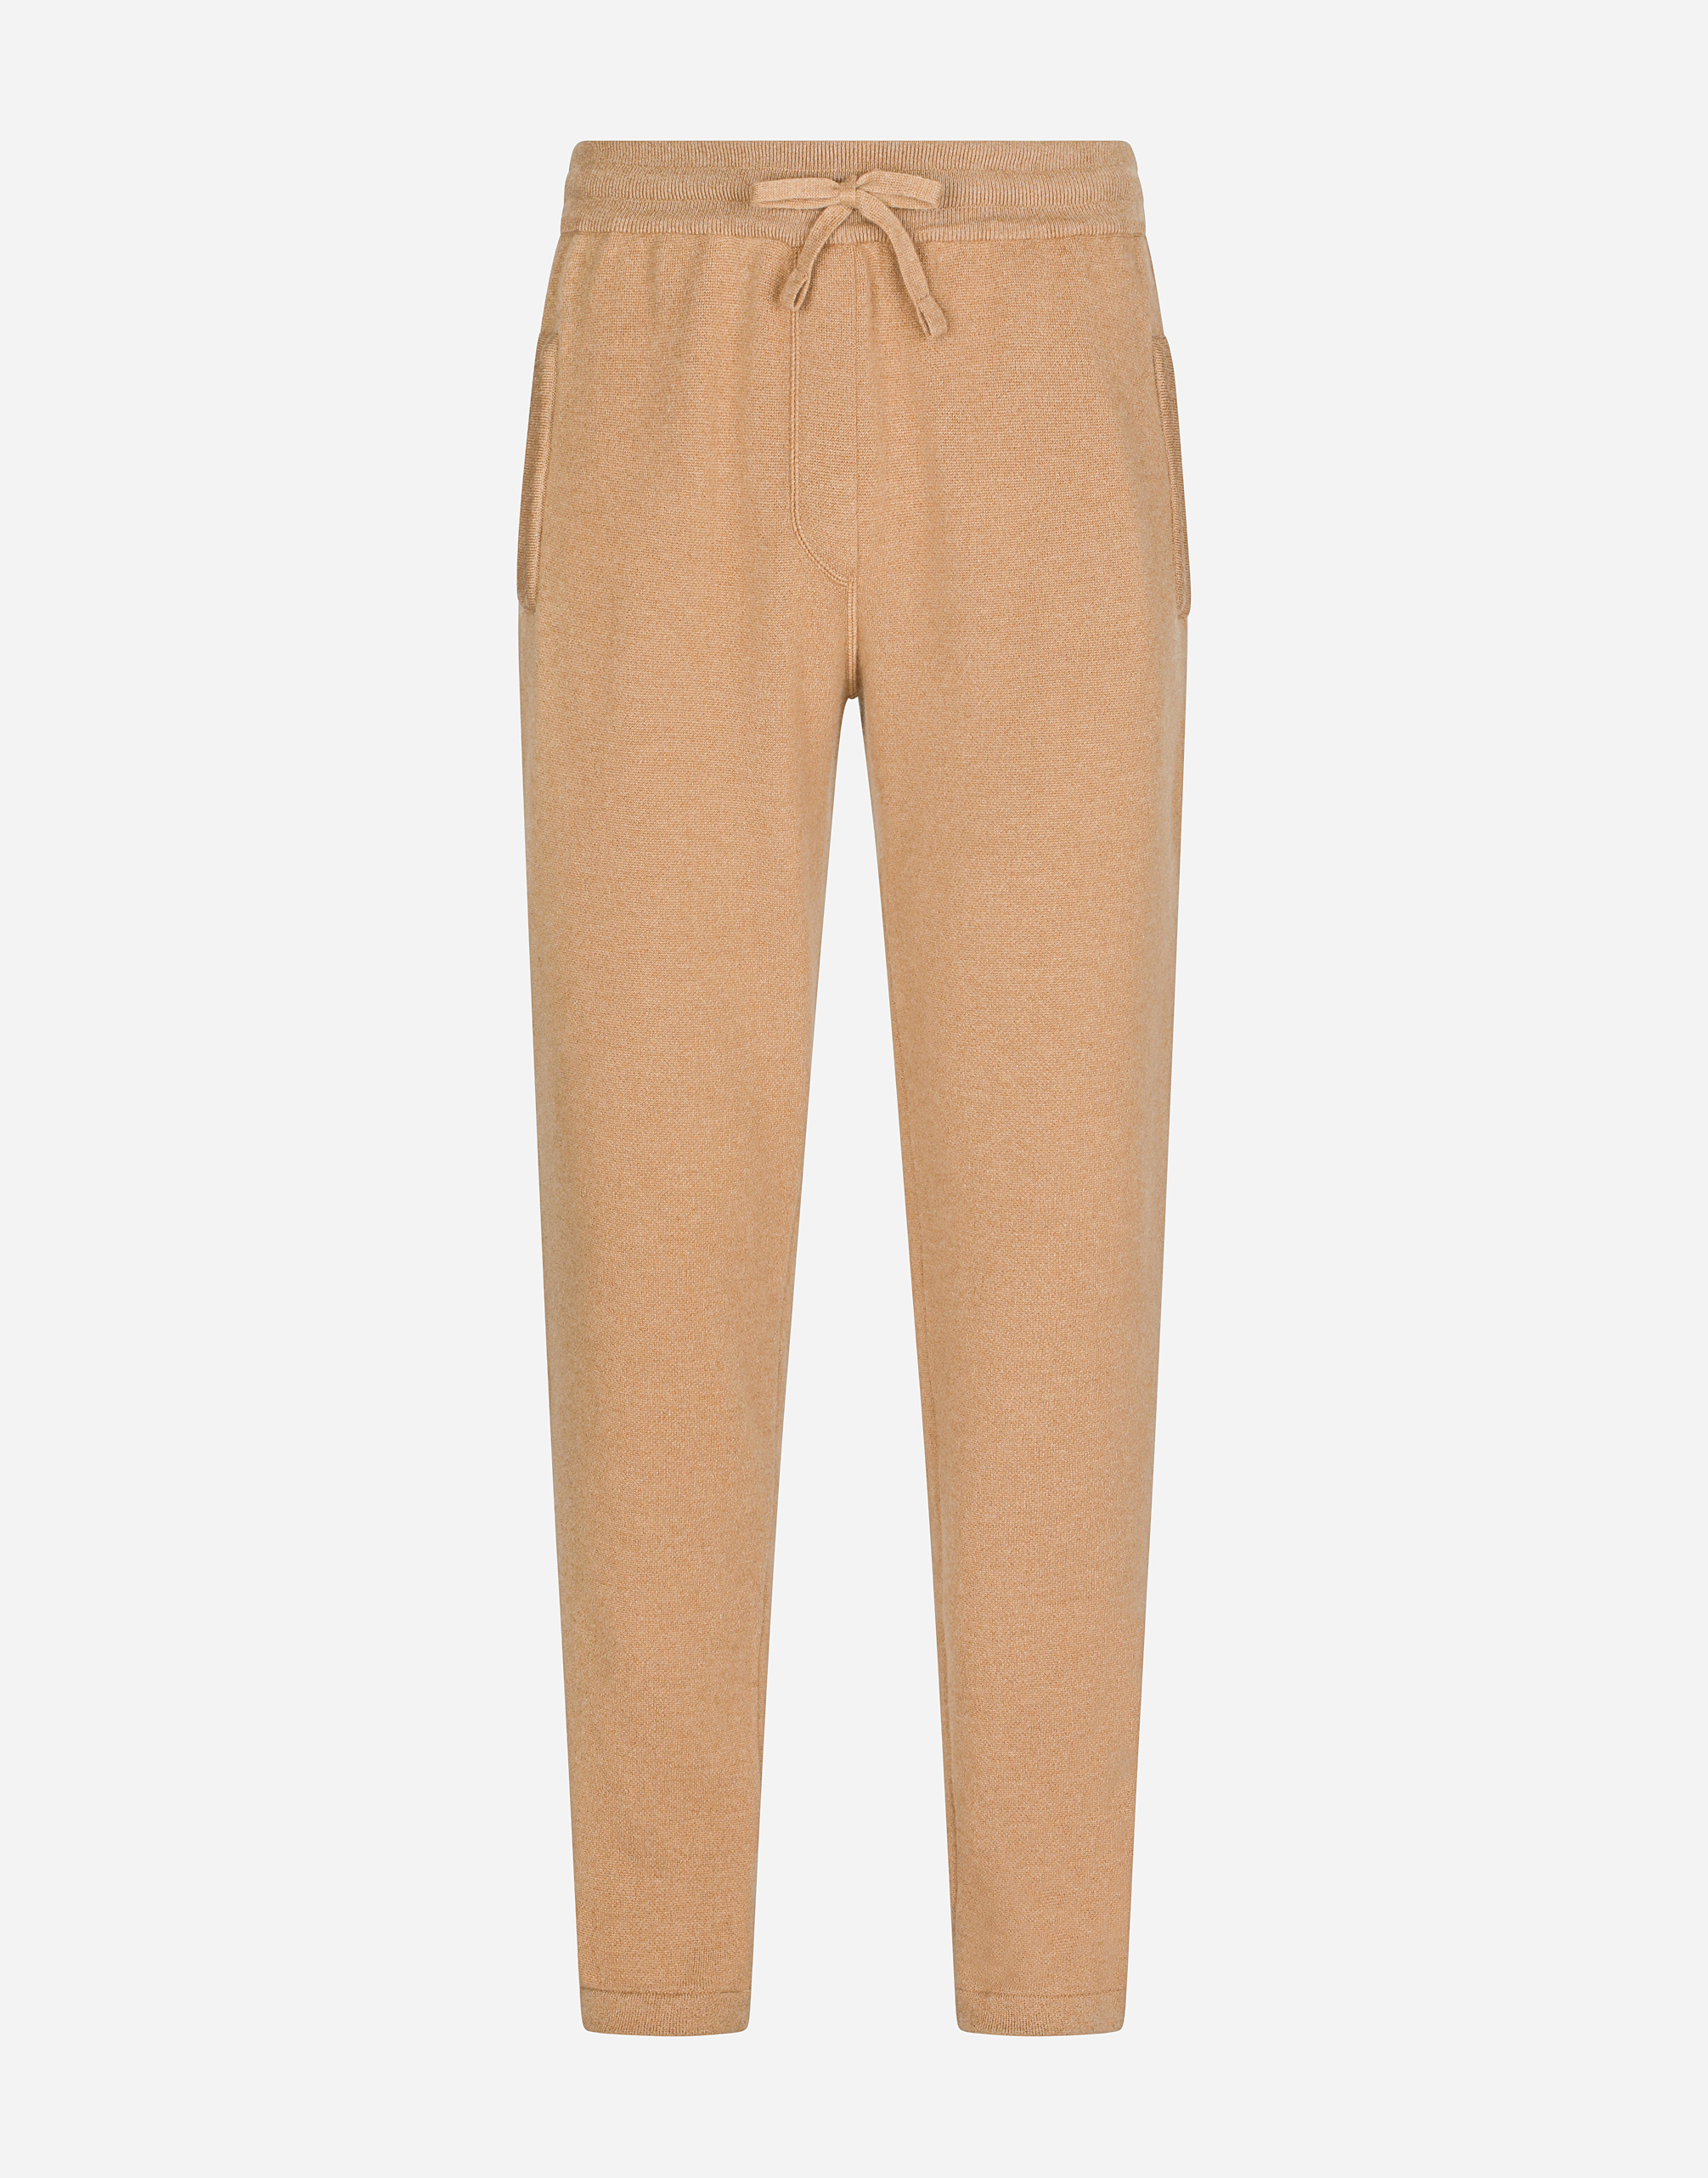 Cashmere jogging pants with DG logo in Beige